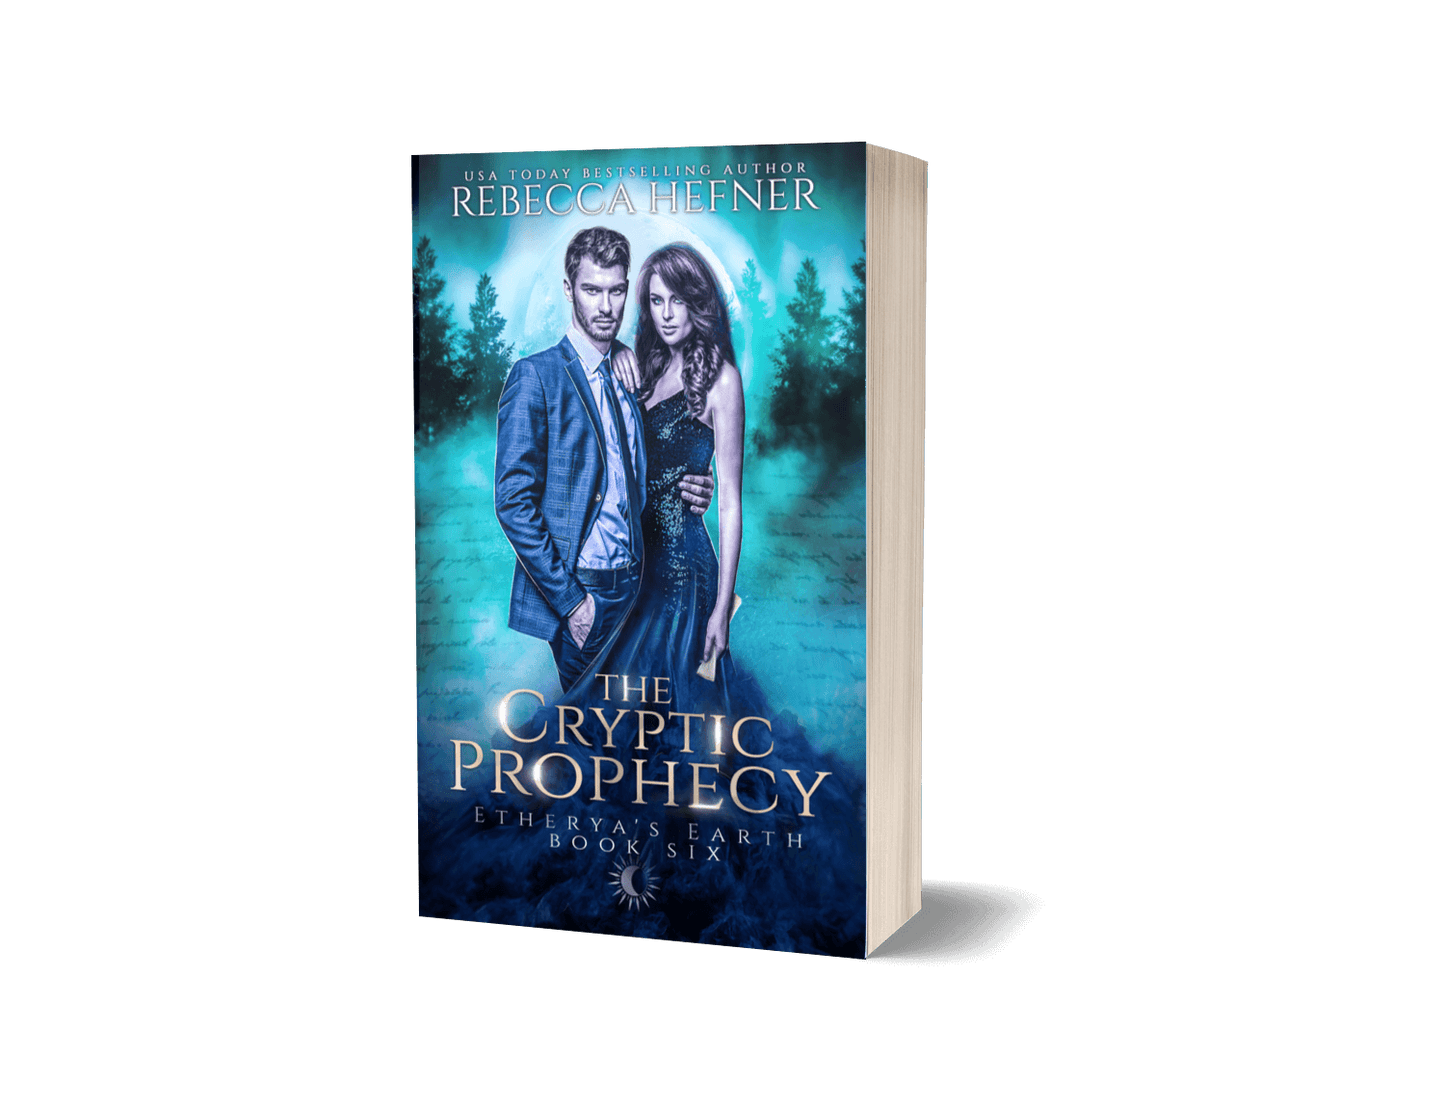 The Cryptic Prophecy Signed Paperback (Etherya's Earth #6)